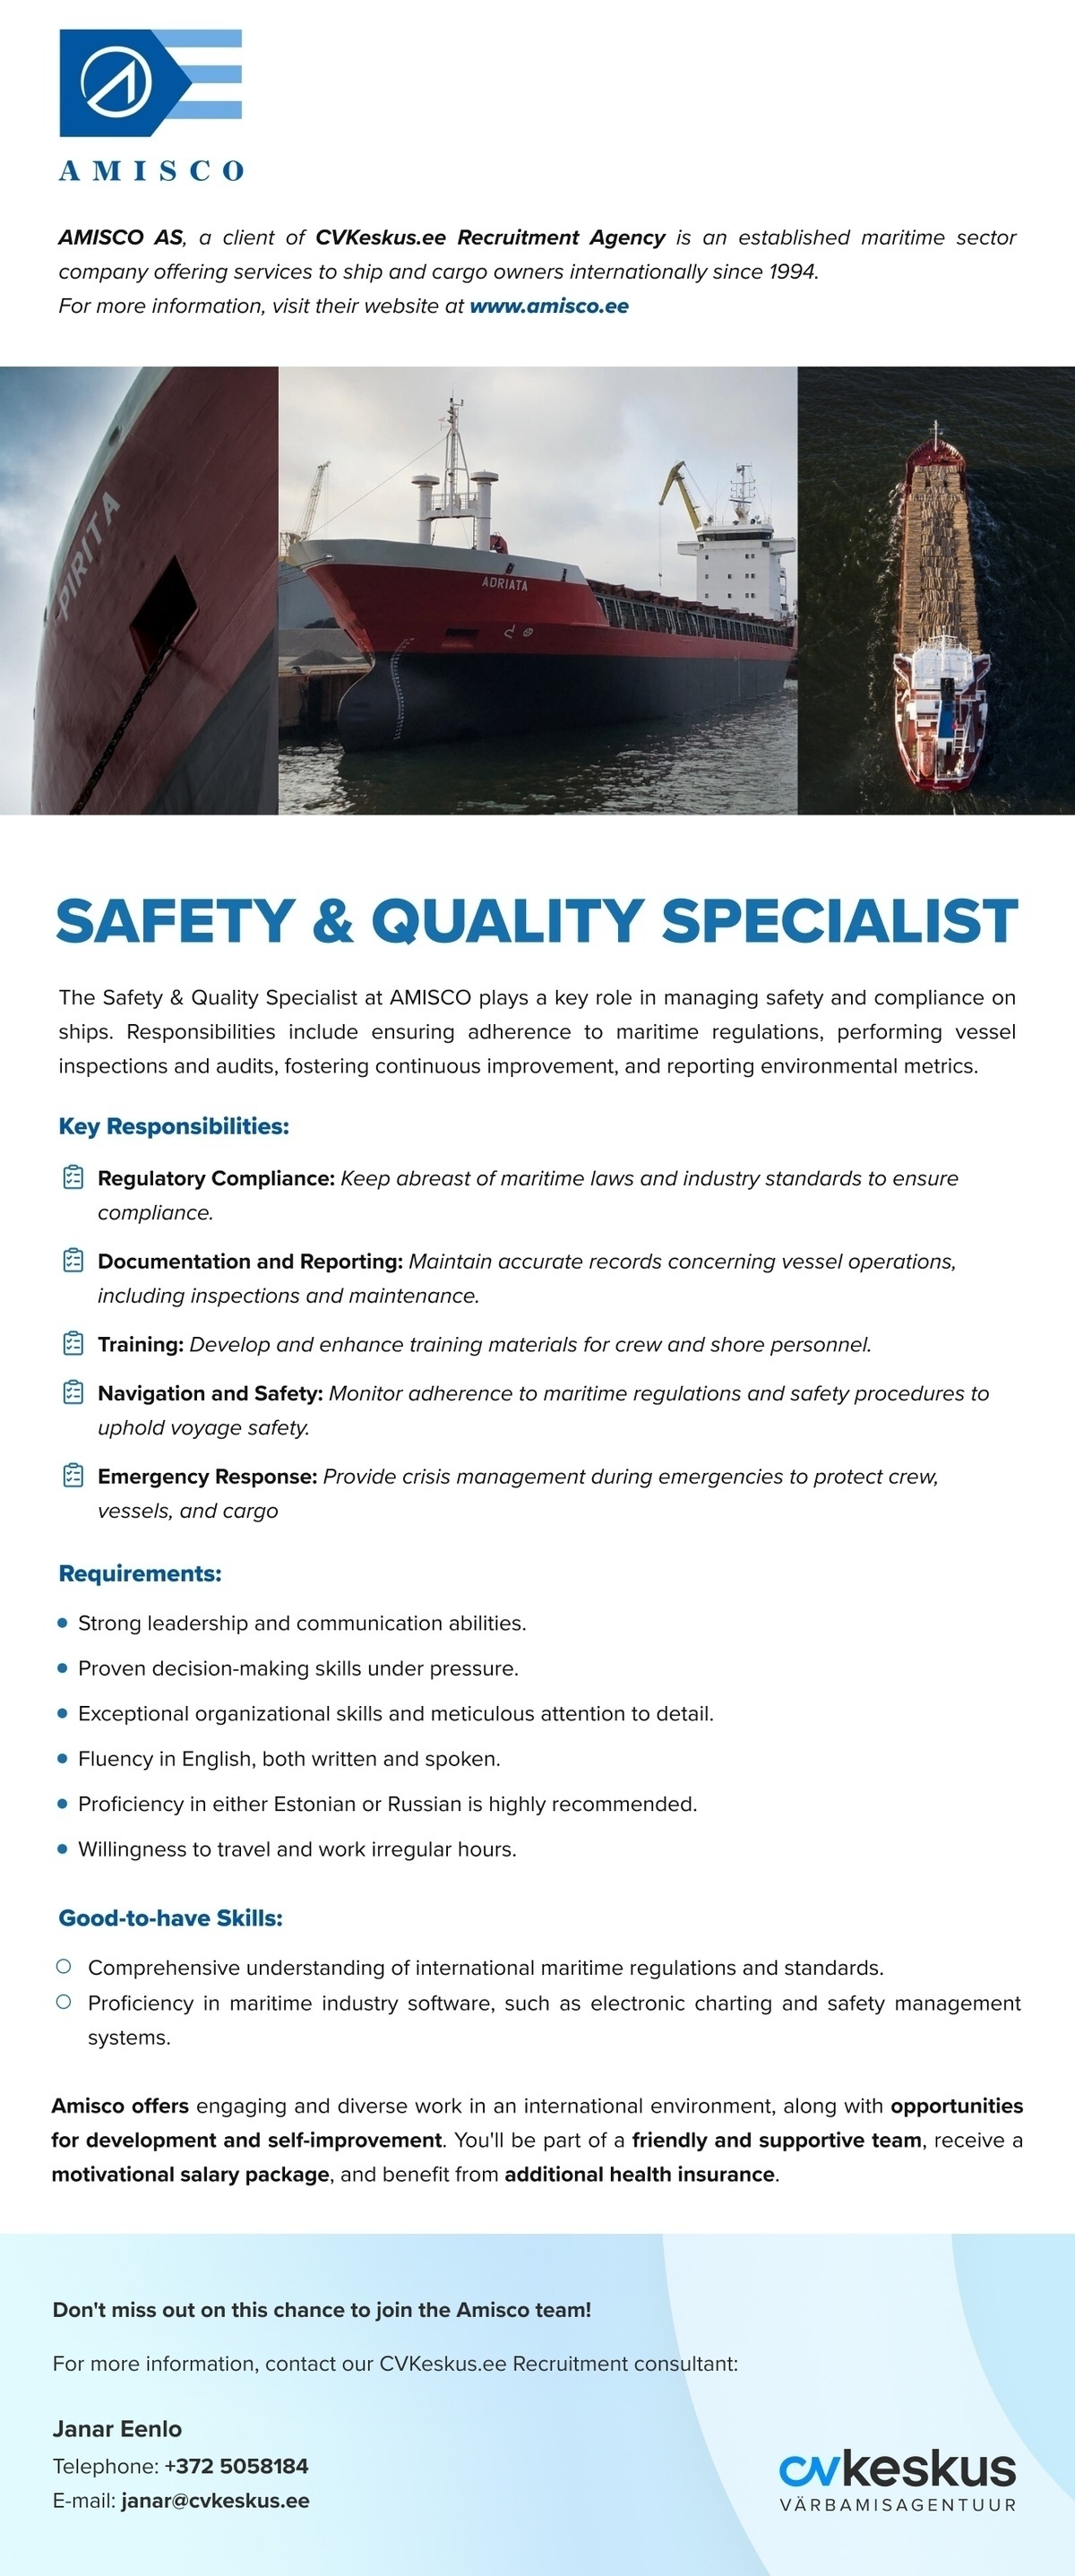 AMISCO AS SAFETY & QUALITY SPECIALIST